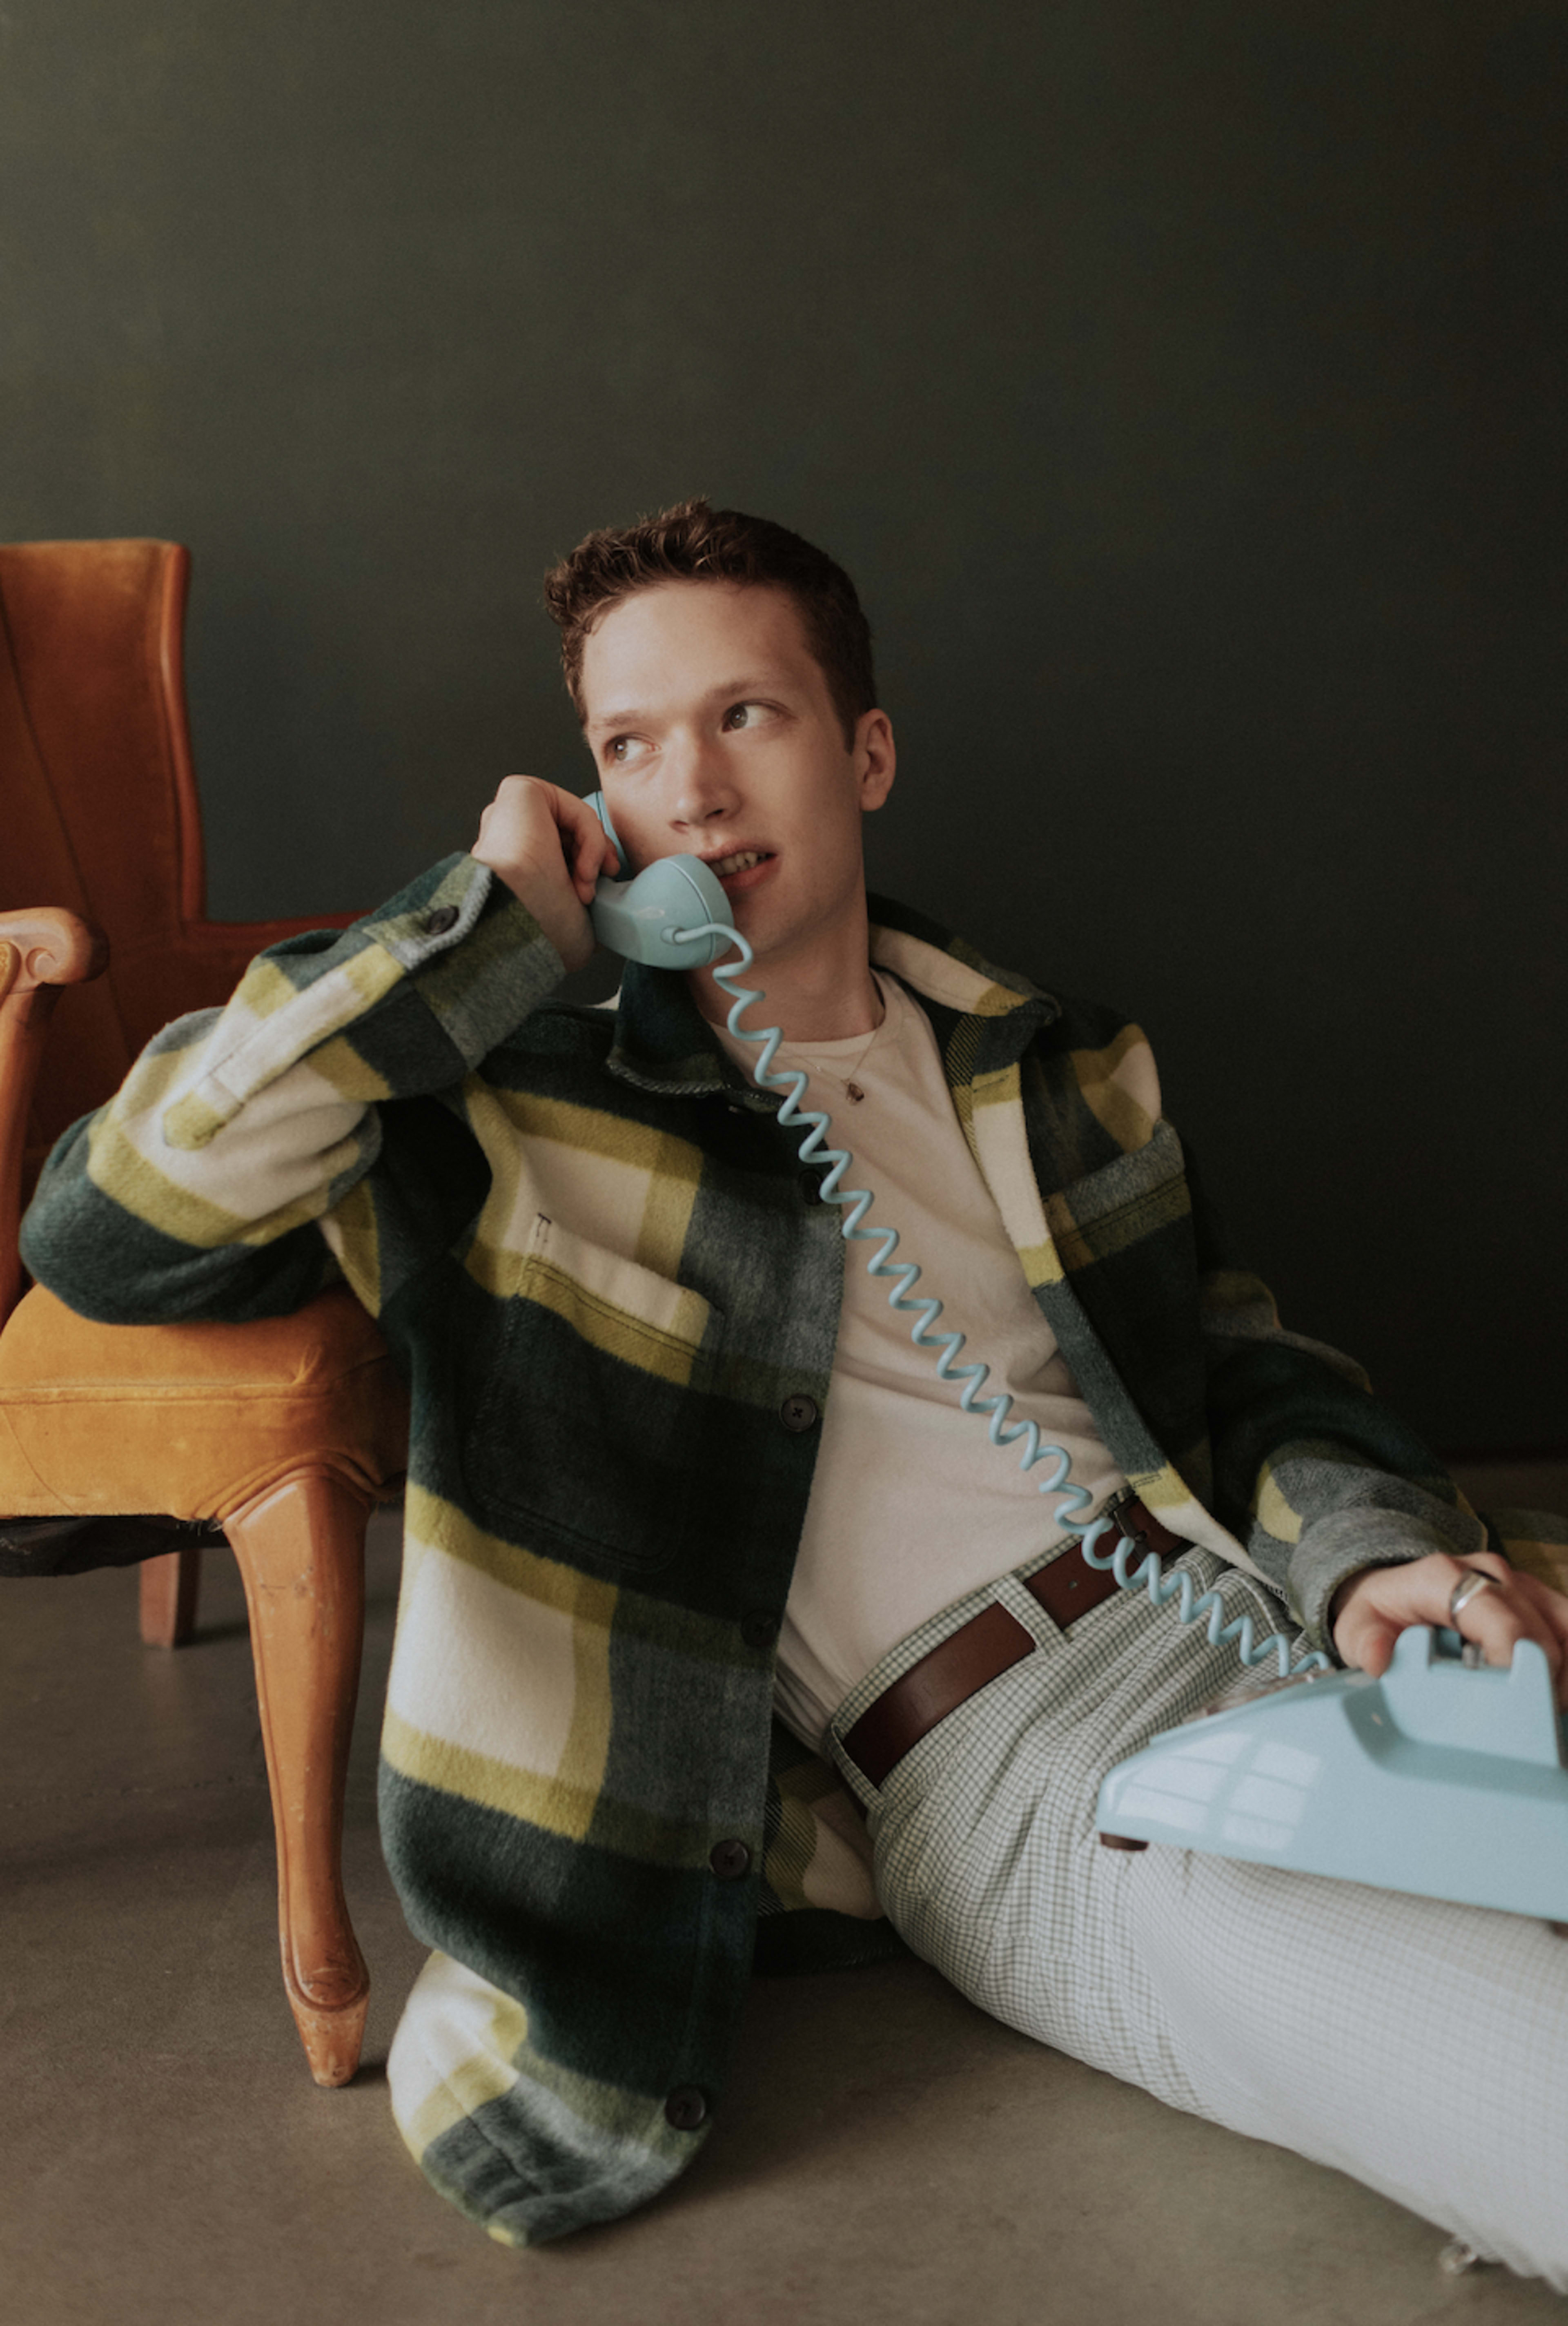 A man poses with a phone for a retro photo shoot.